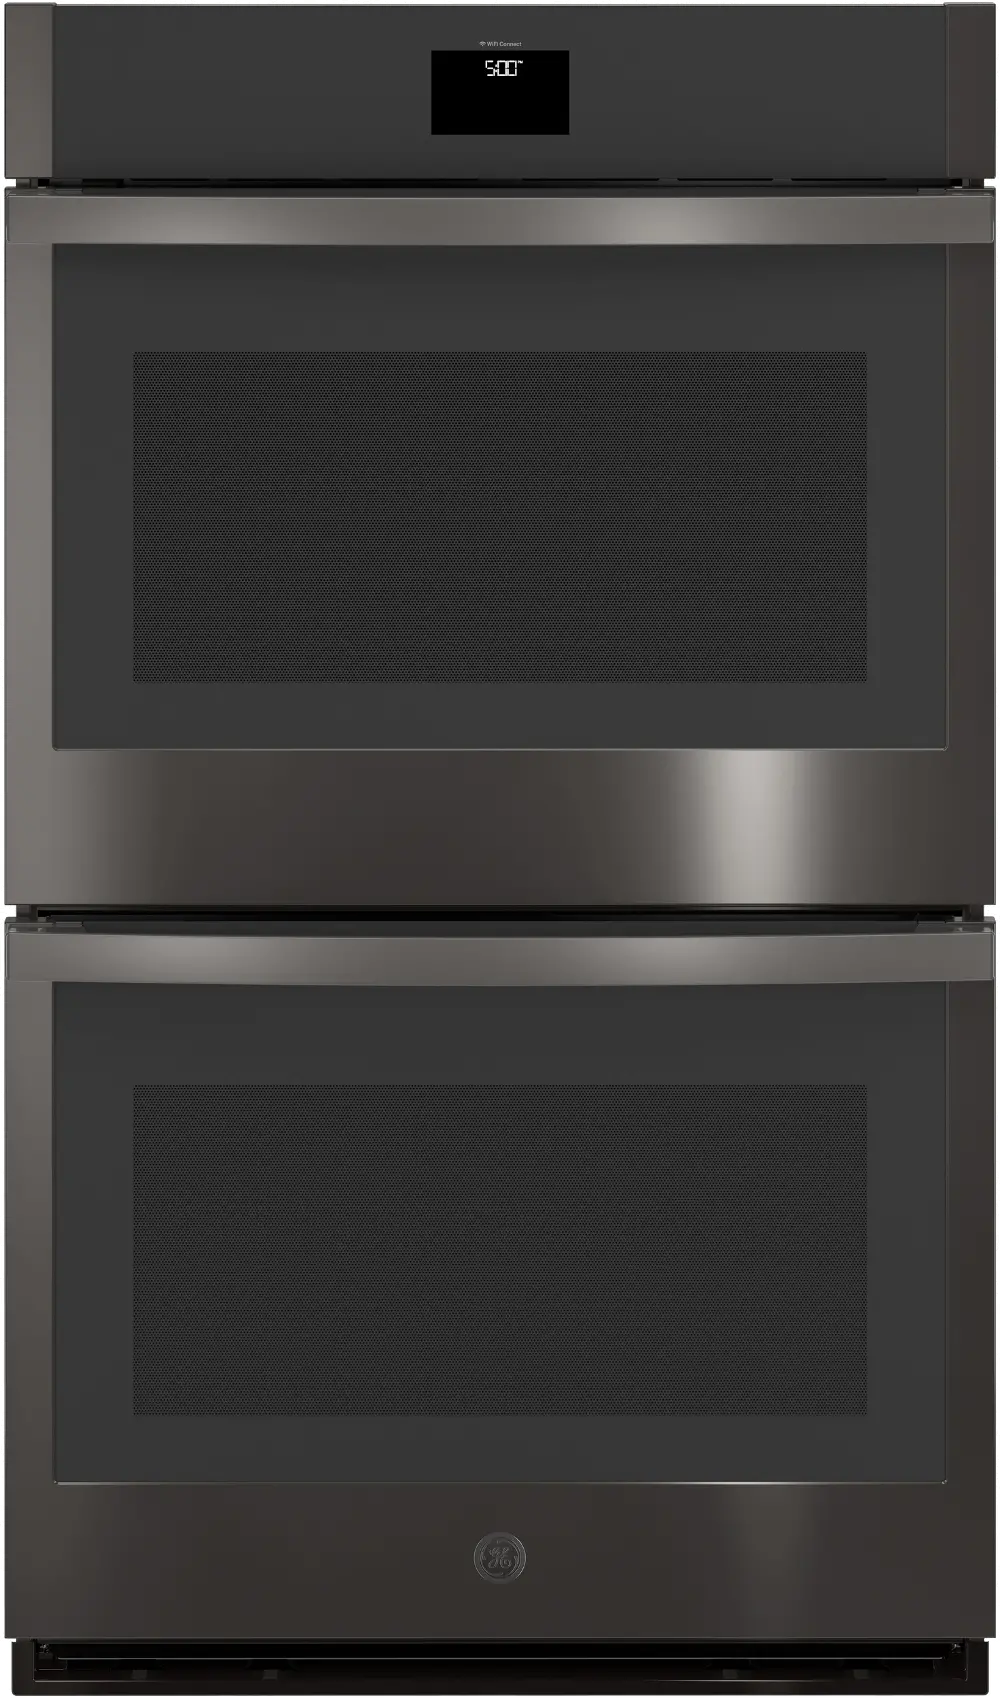 JTD5000BNTS GE 30 Inch Double Wall Smart Oven - 10.0 cu. ft. Black Stainless Steel-1